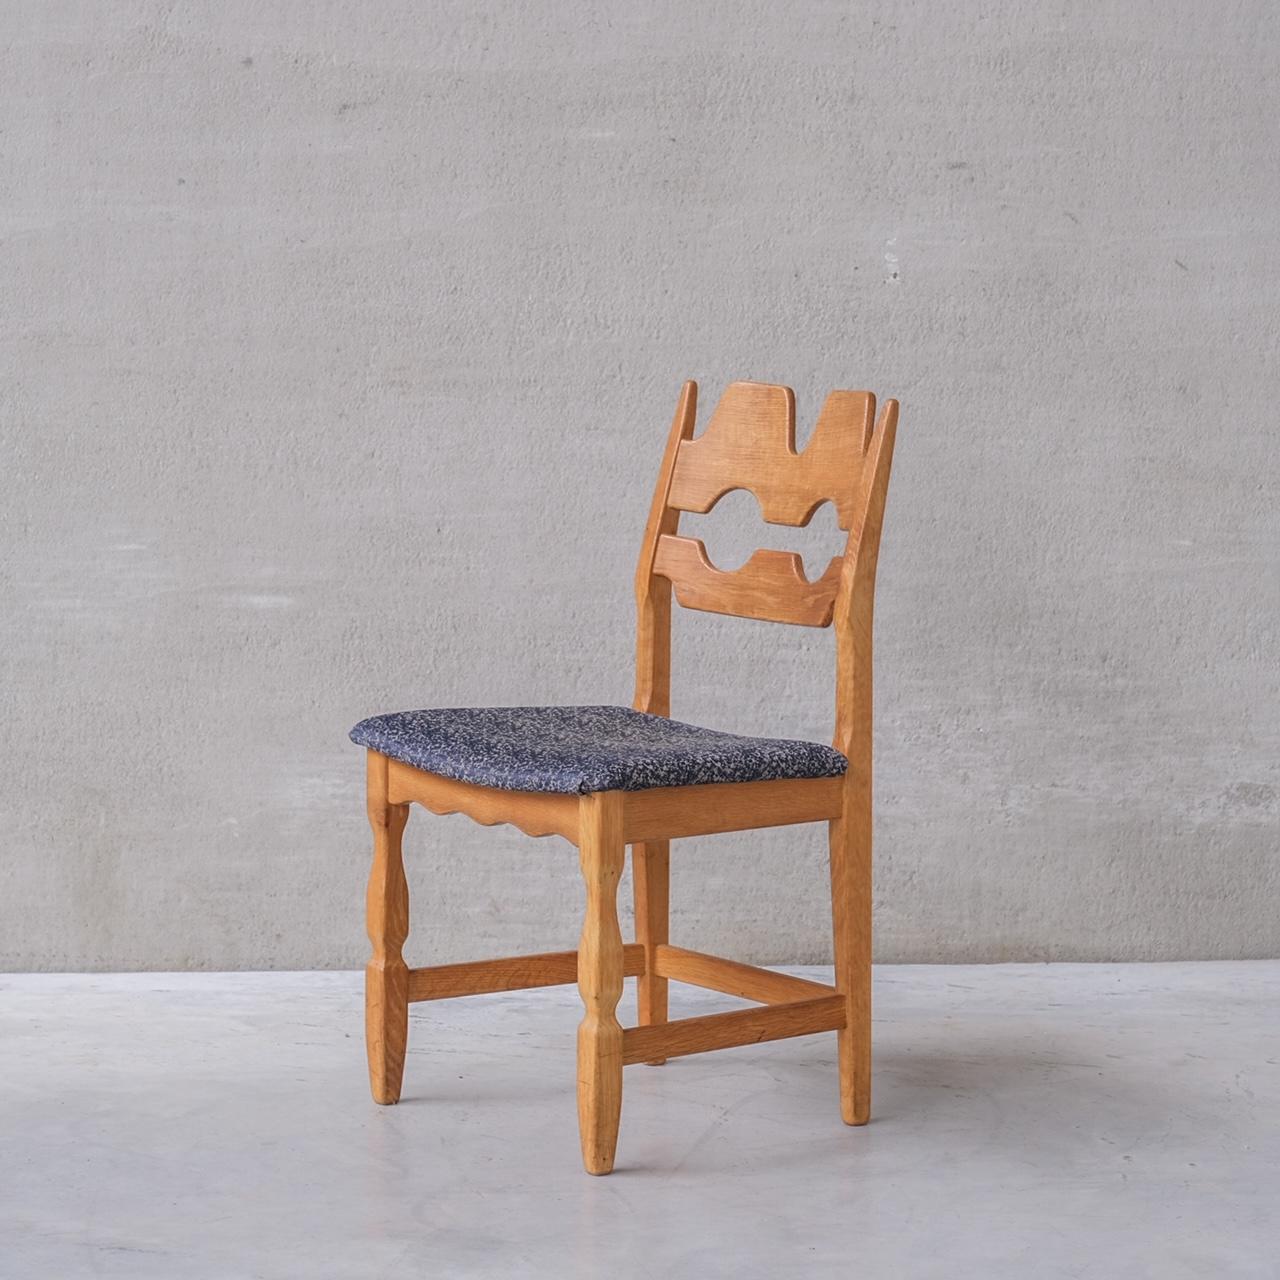 Oak dining chairs by Henning Kjaernulf. A set of four. 

Denmark, c1960s.

'Razor back' or 'Razor blade' model.

Original patina and finish.

Original upholstery has been retained but normally has signs of use and age. We can update these